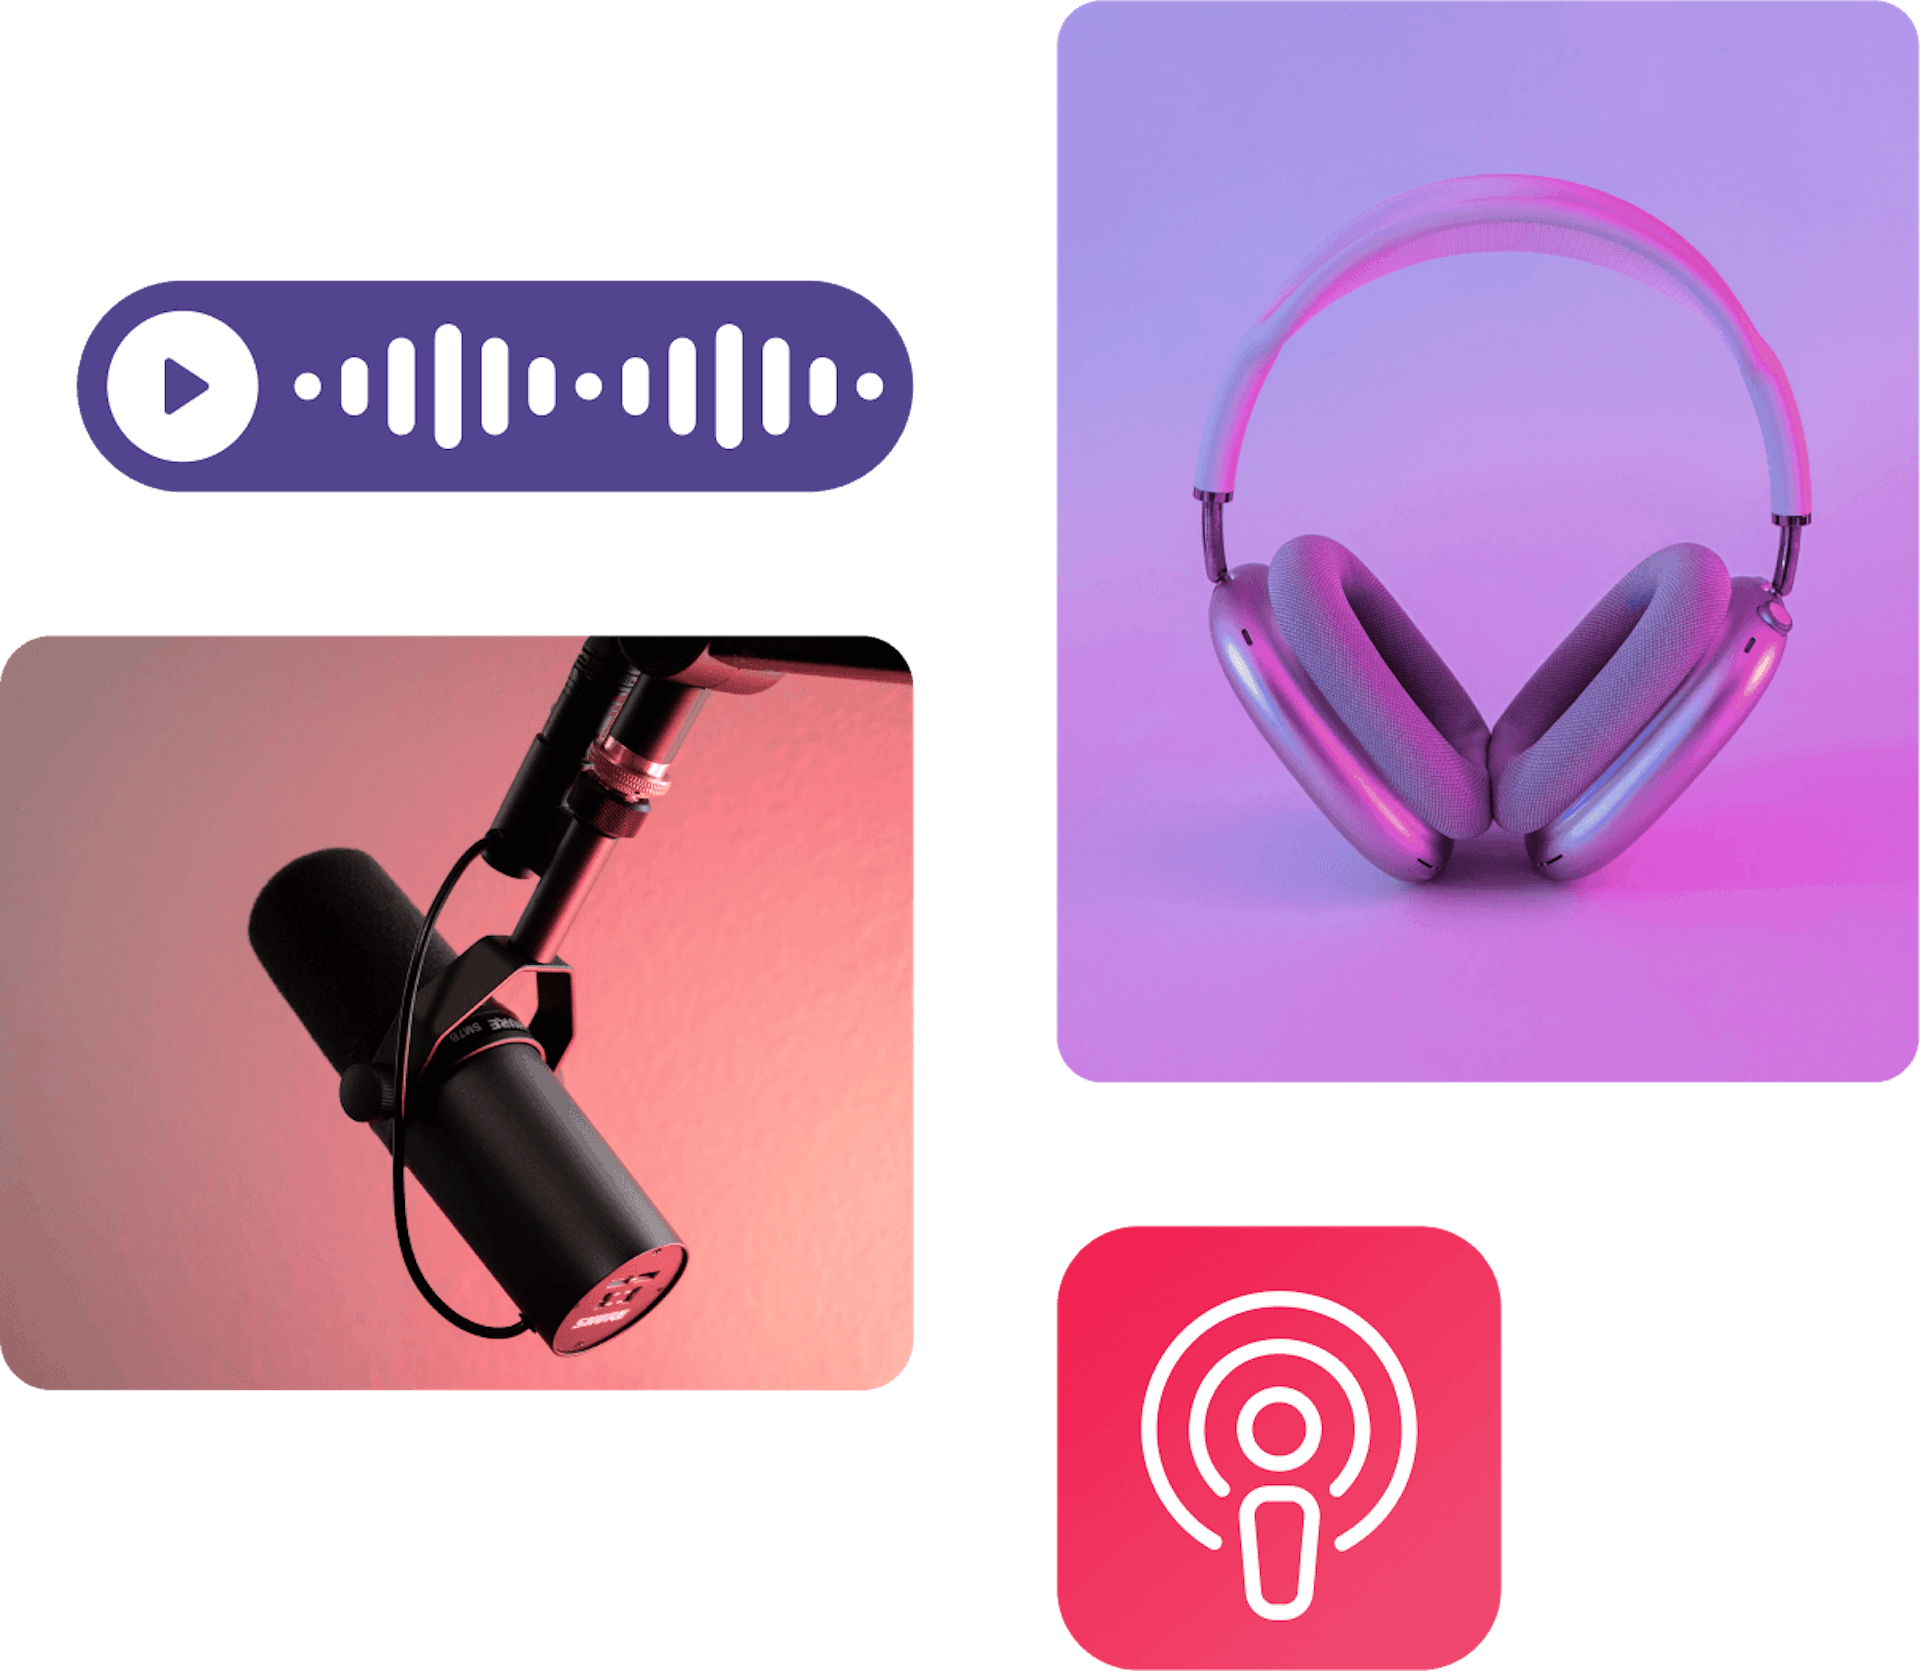 Placeholder image for podcasts page showing headphones.